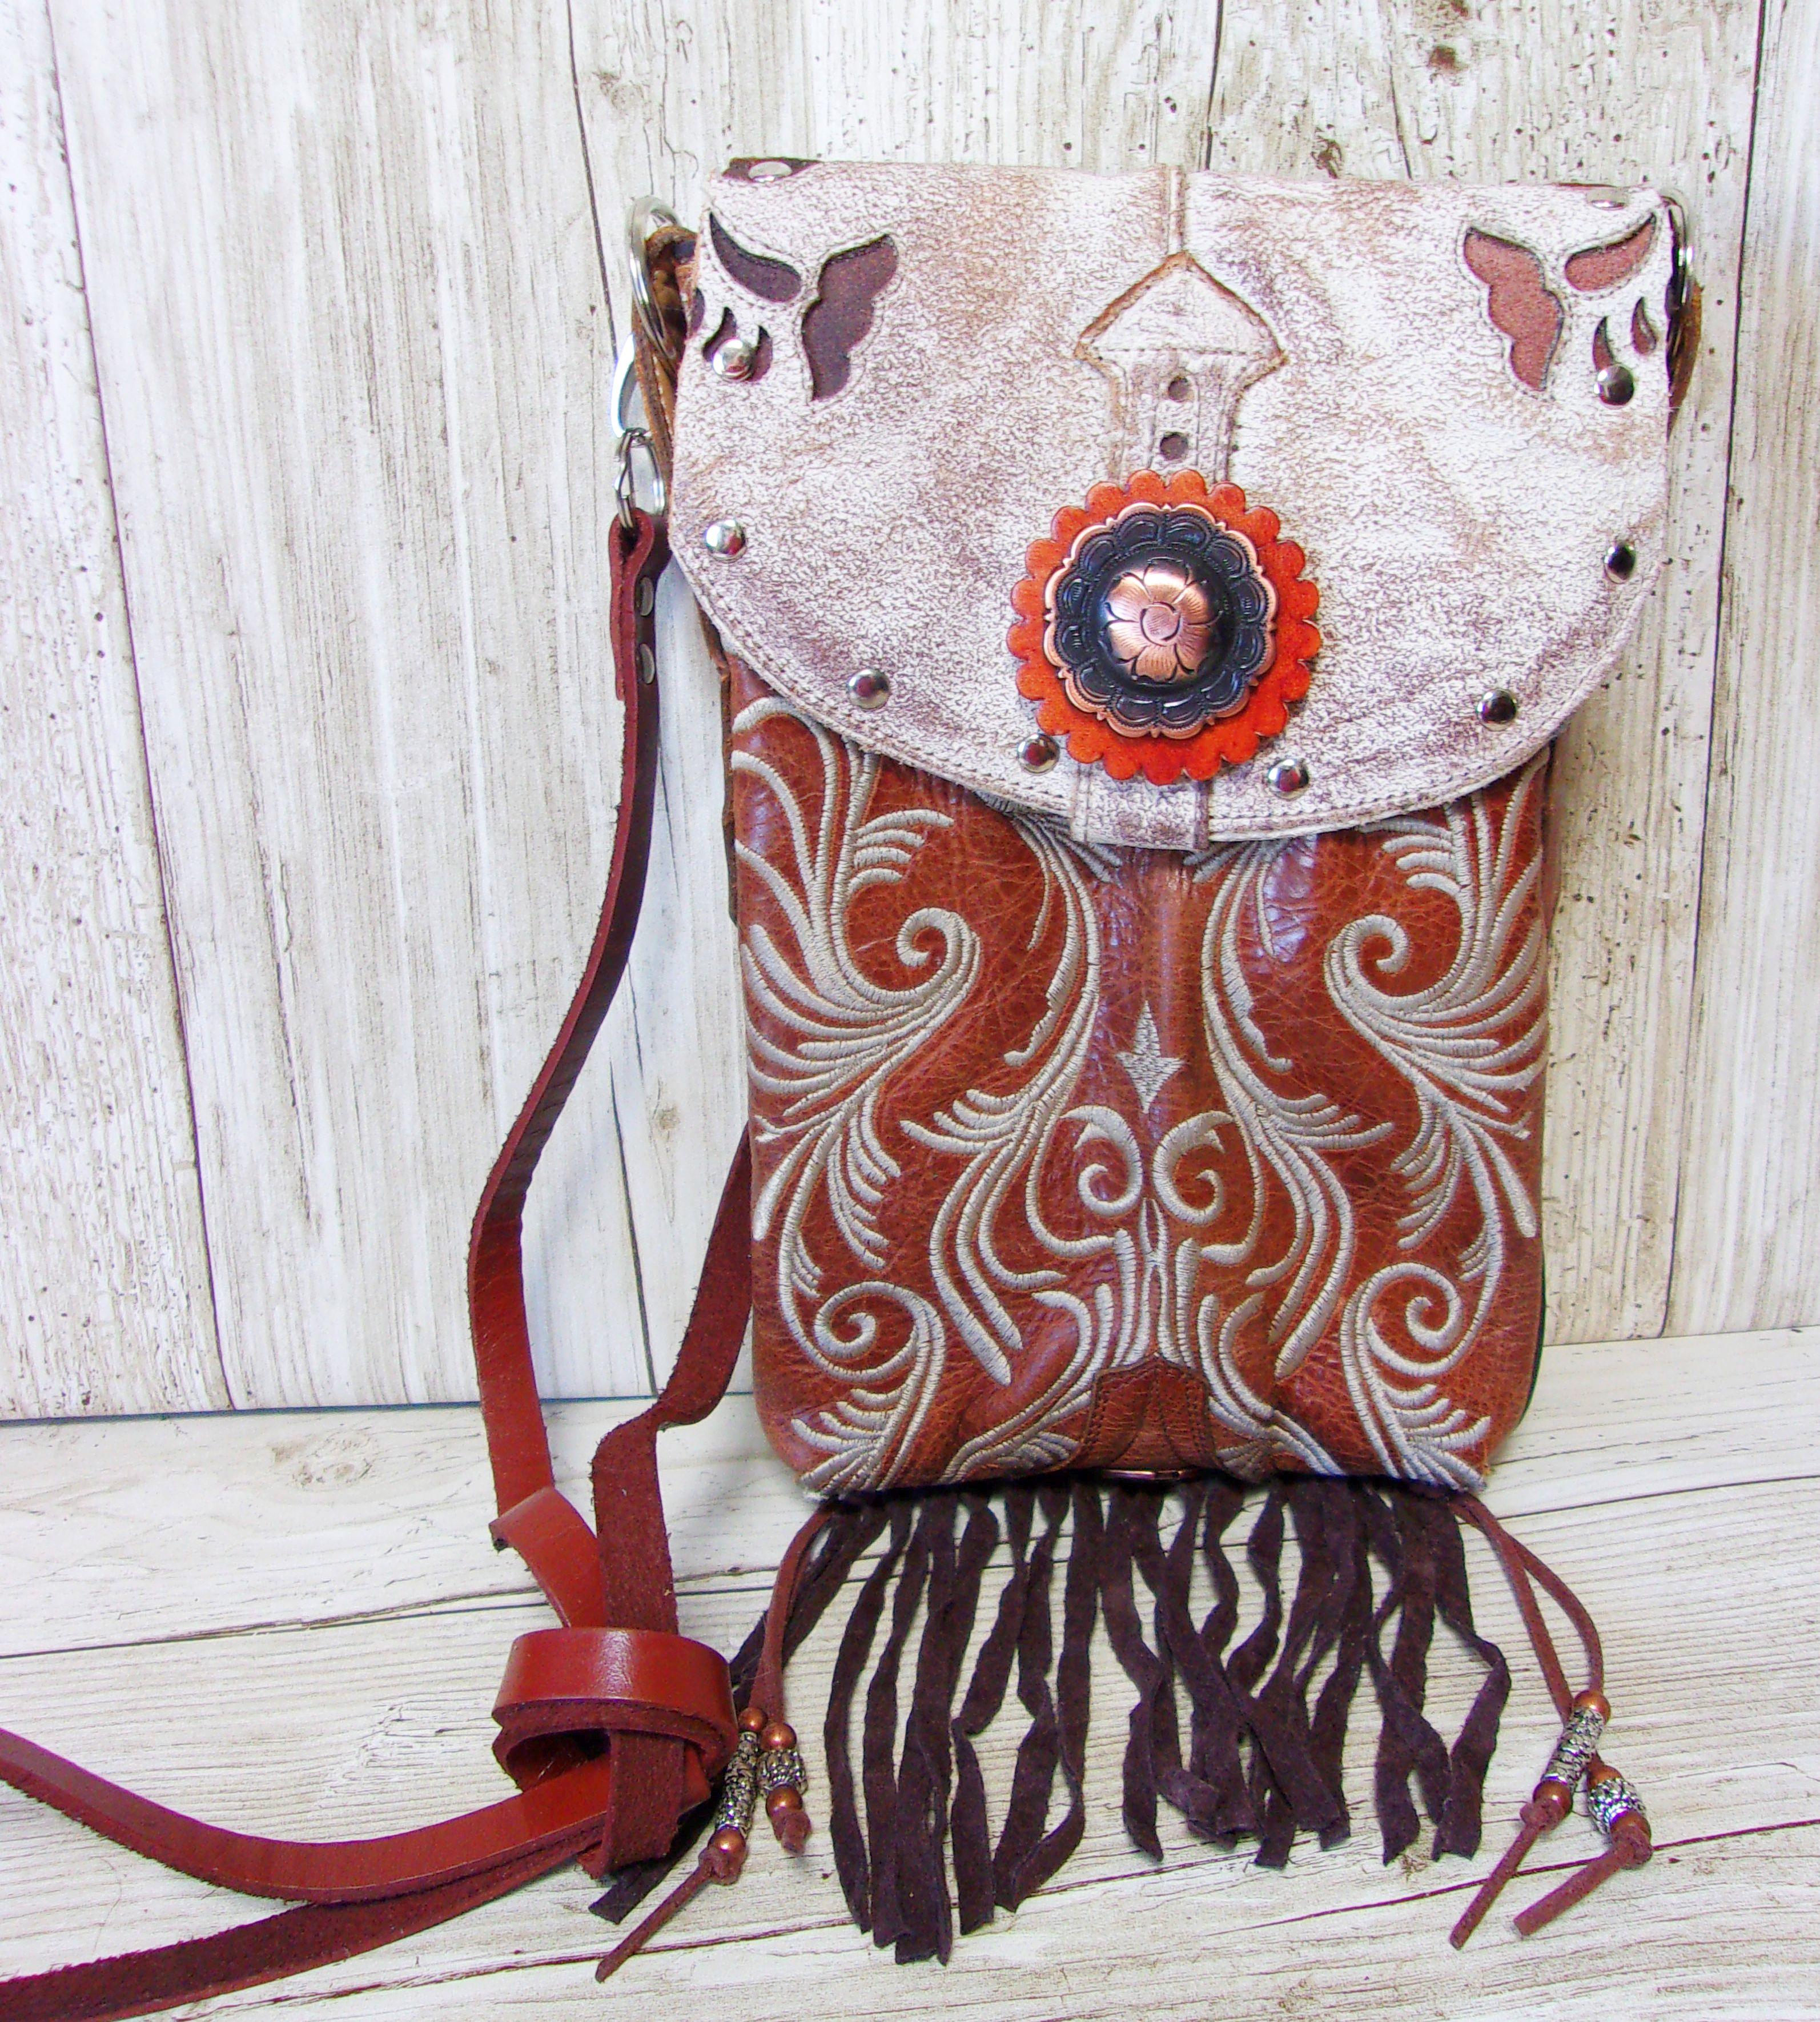 Crossbody Hipster Purse with Fringe – Cowboy Boot Purse – Western Crossbody Bag with Fringe HP808 cowboy boot purses, western fringe purse, handmade leather purses, boot purse, handmade western purse, custom leather handbags Chris Thompson Bags